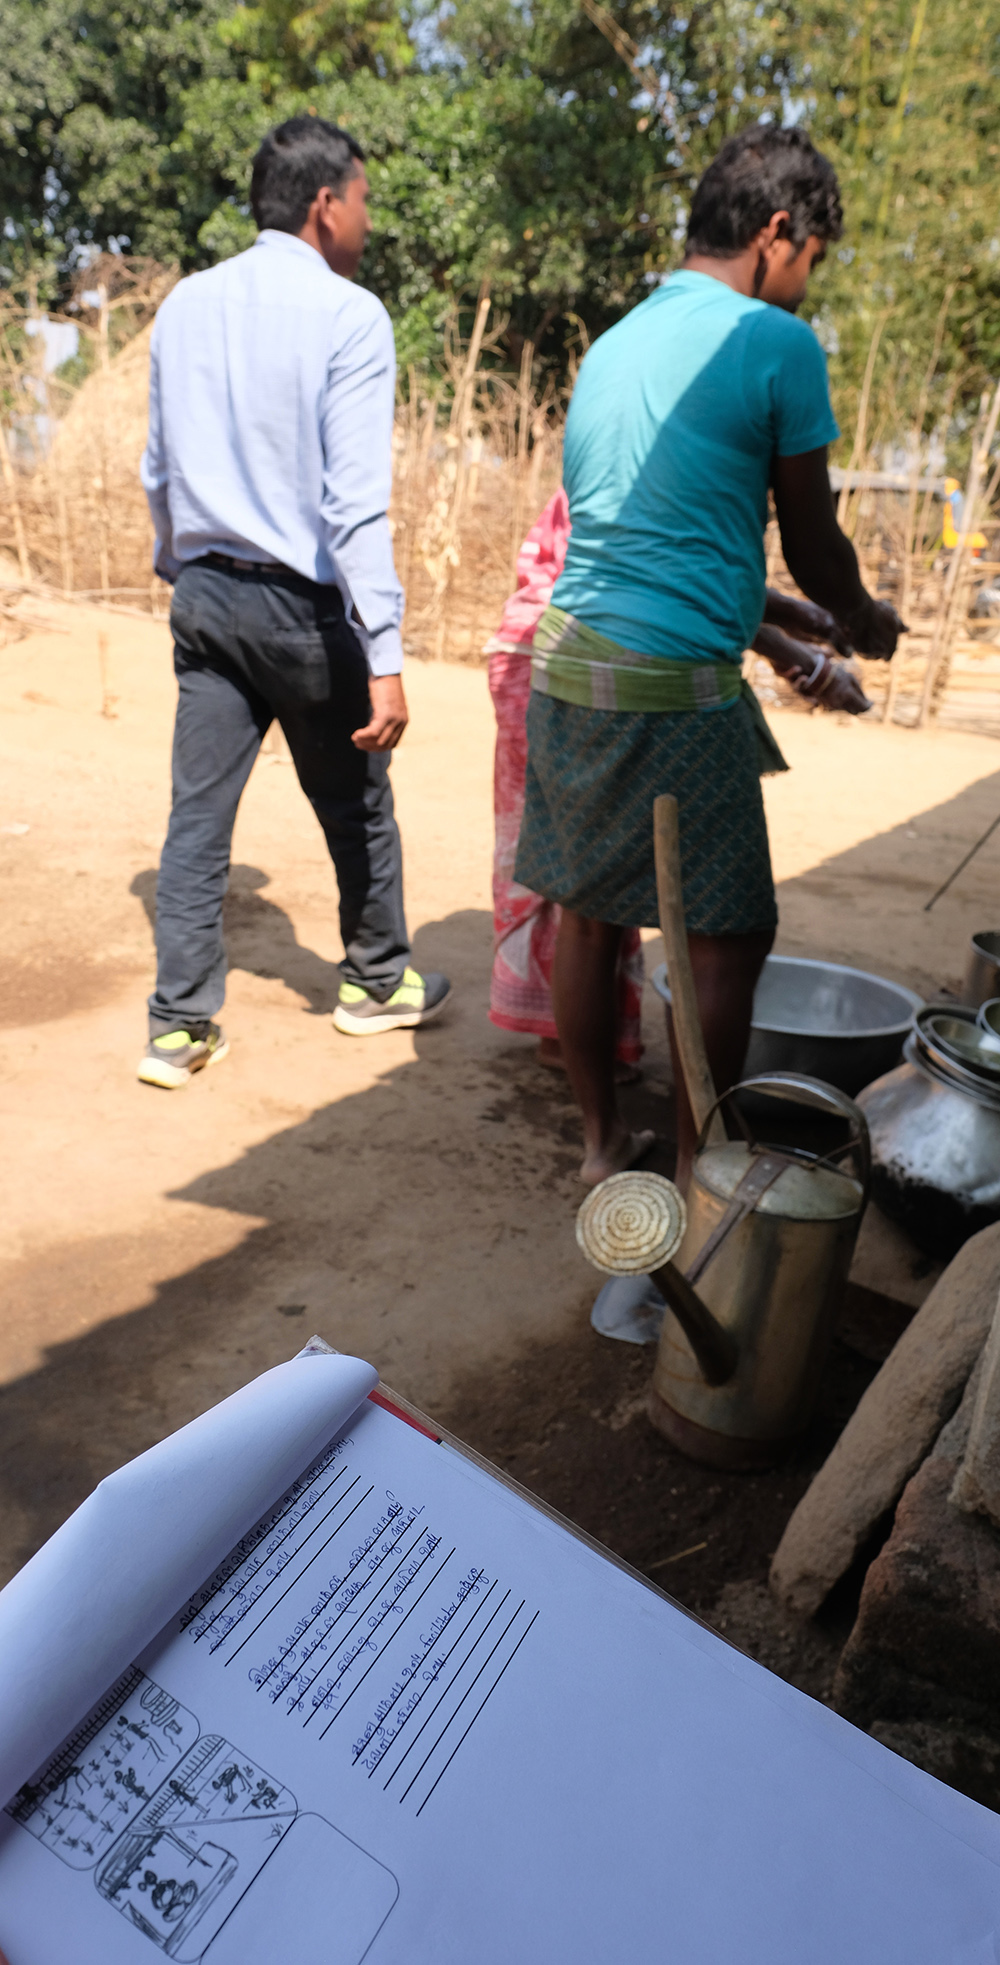 An outline of the story shows how the video was planned to demonstrate the grandmother and father washing hands to avoid illness after working in the garden with compost. In the background, the father and grandmother wash their hands. Photo credit: Sarah Hogan, 2017